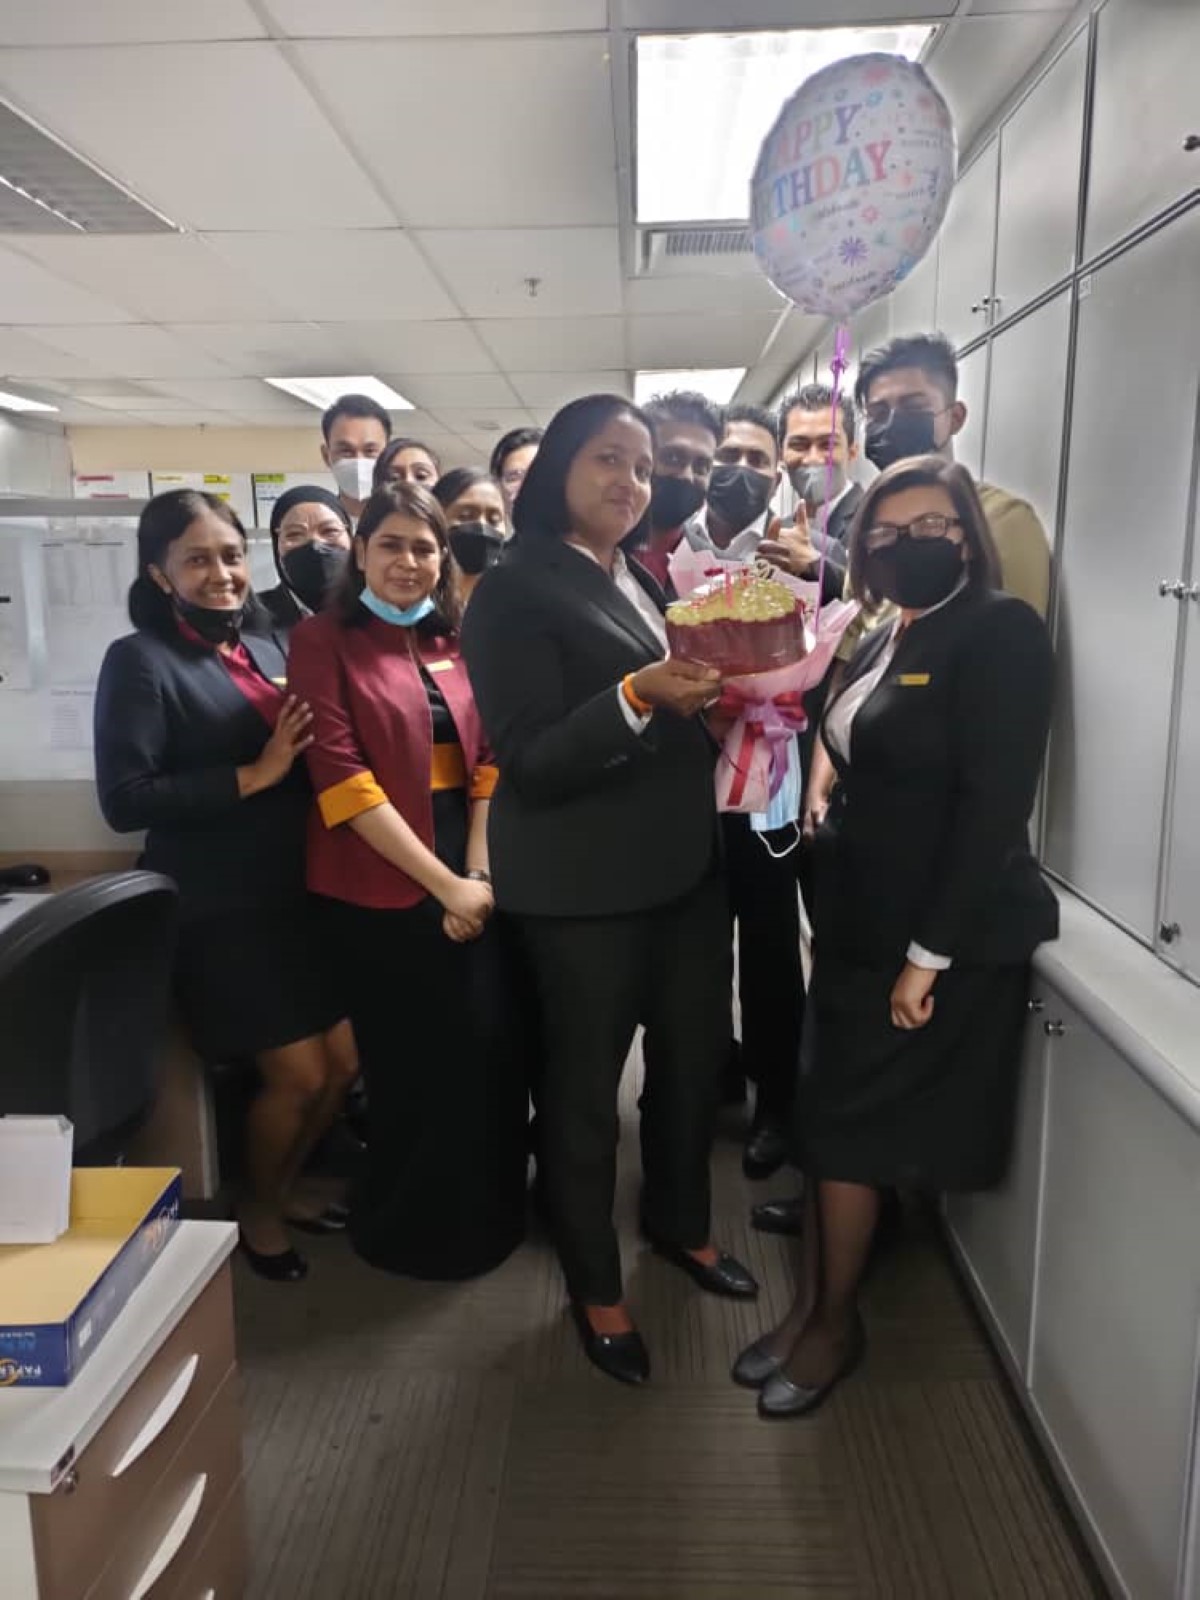 Shanta alongside her colleagues celebrating her birthday, holding a birthday cake and some balloons.